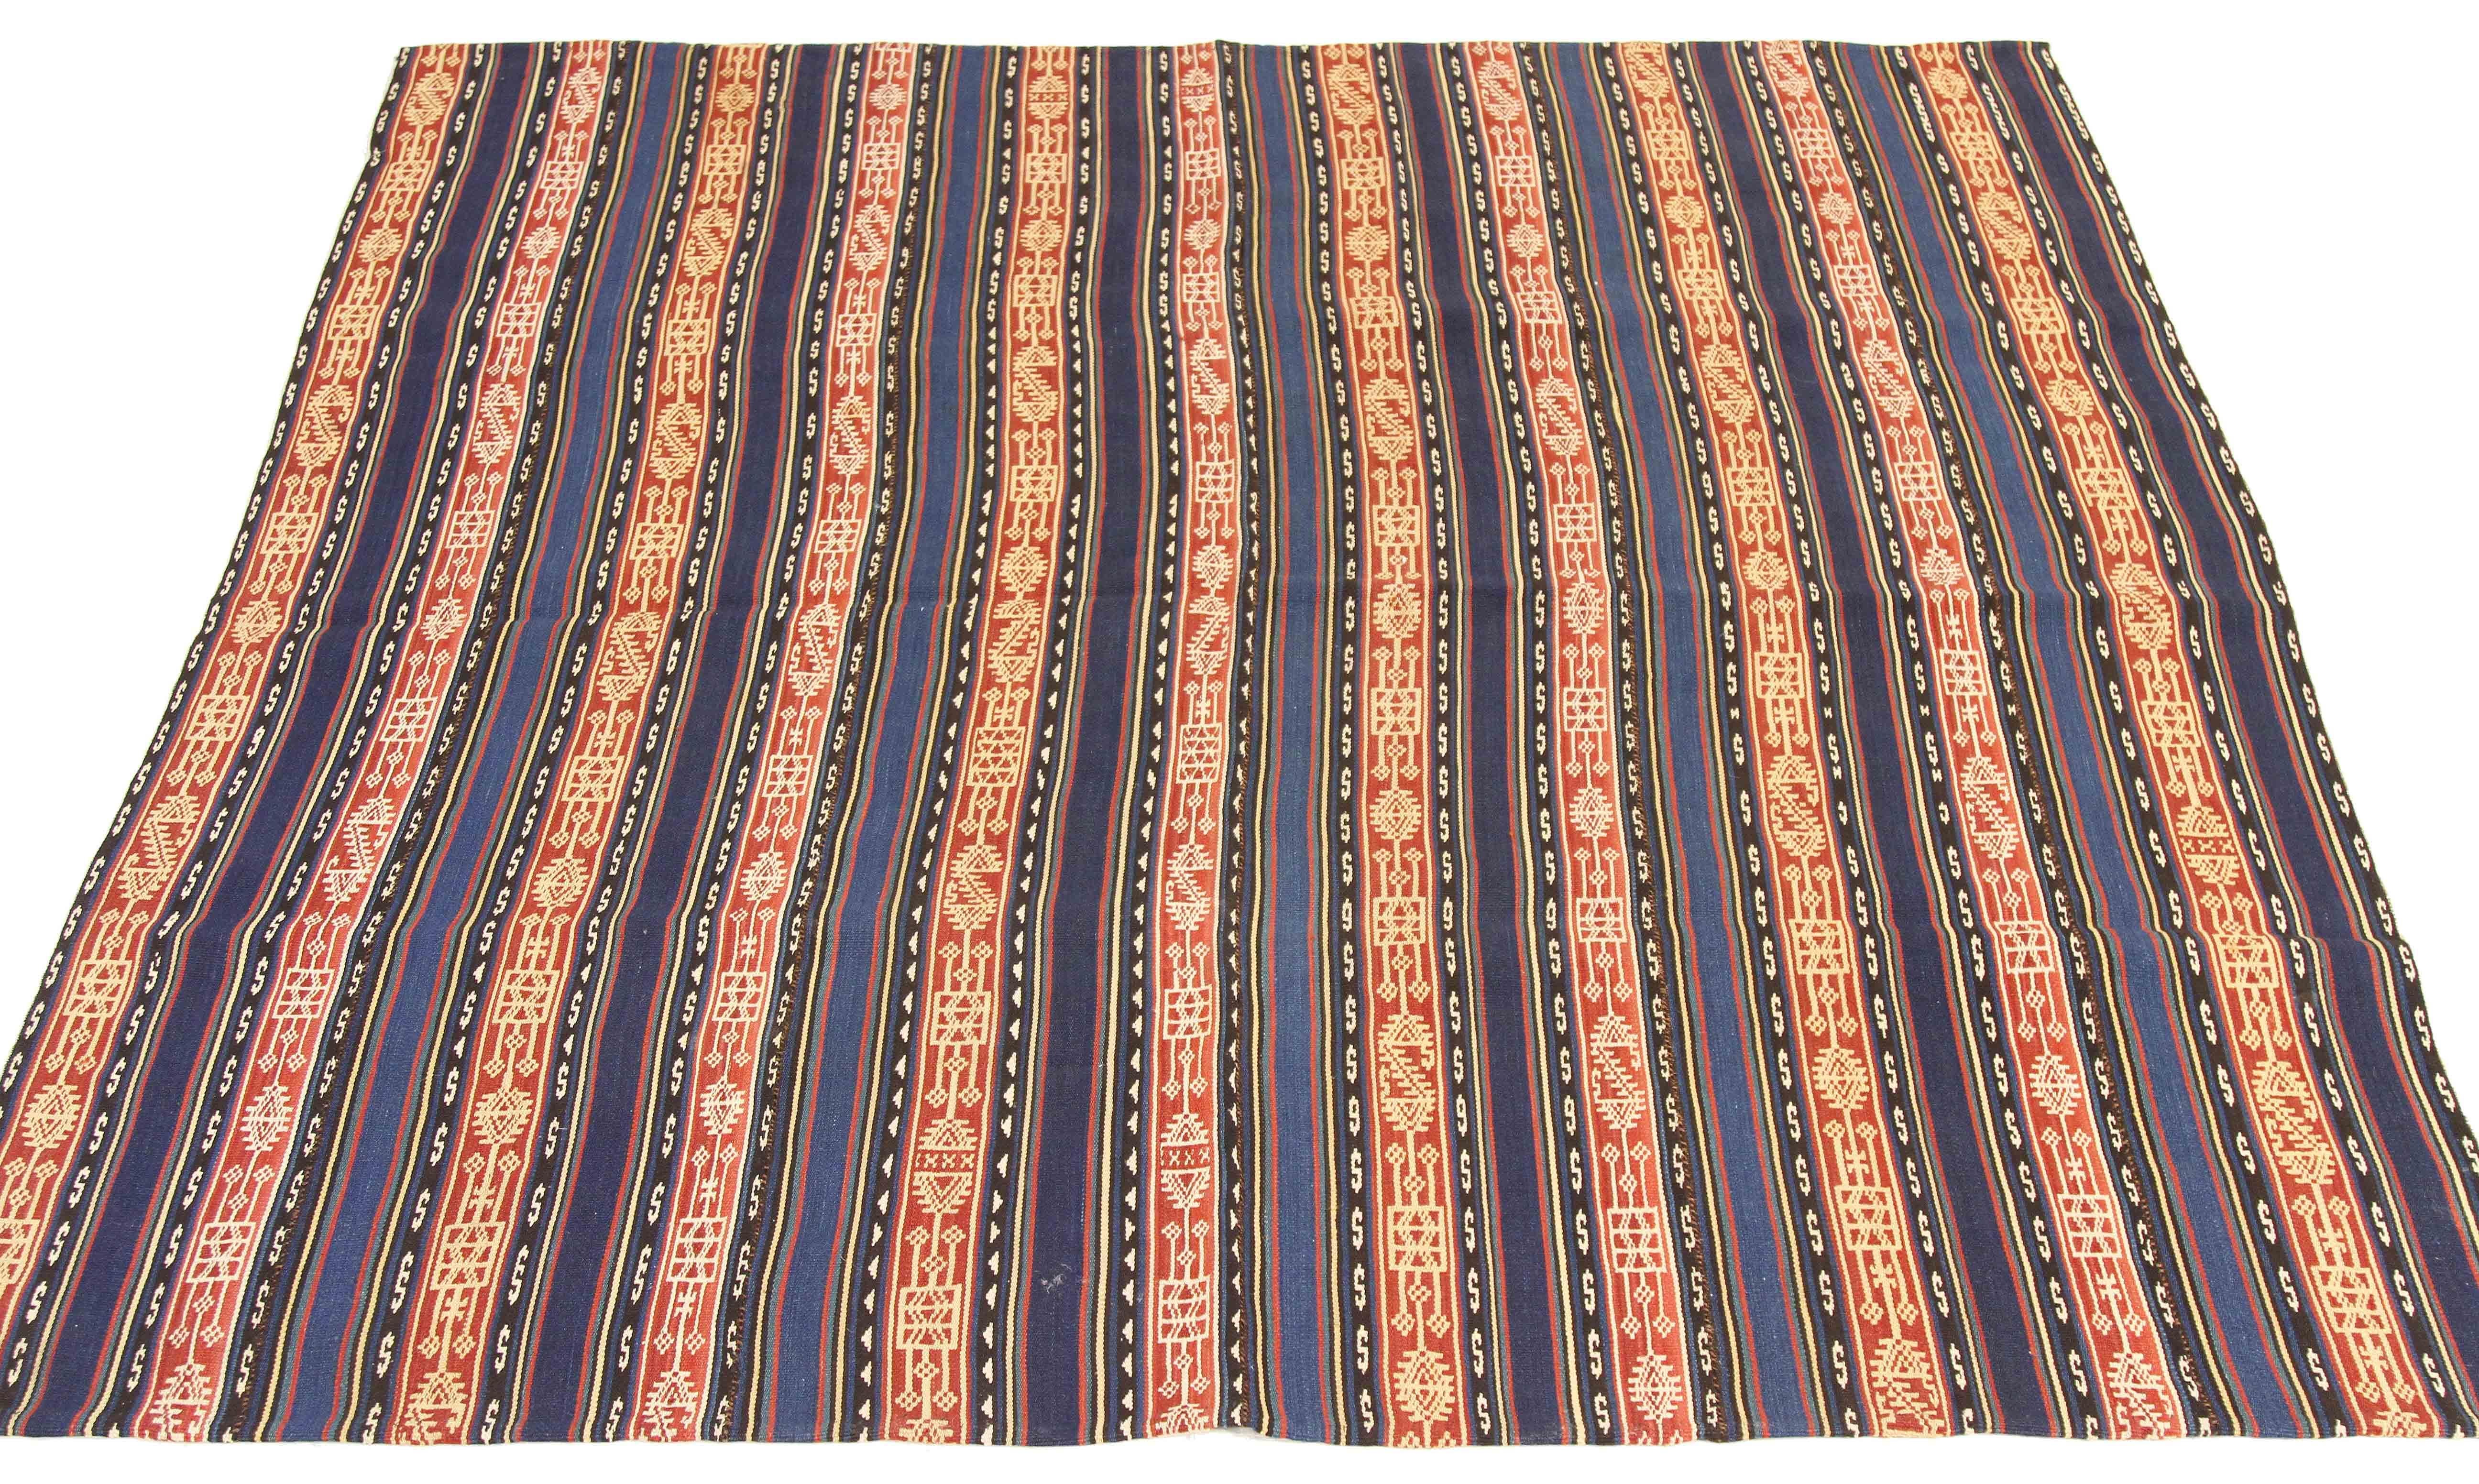 Antique Persian rug handwoven from the finest sheep’s wool and colored with all-natural vegetable dyes that are safe for humans and pets. It’s a traditional Jajim flat-weave design featuring navy and brown tribal stripes. It’s a stunning piece to